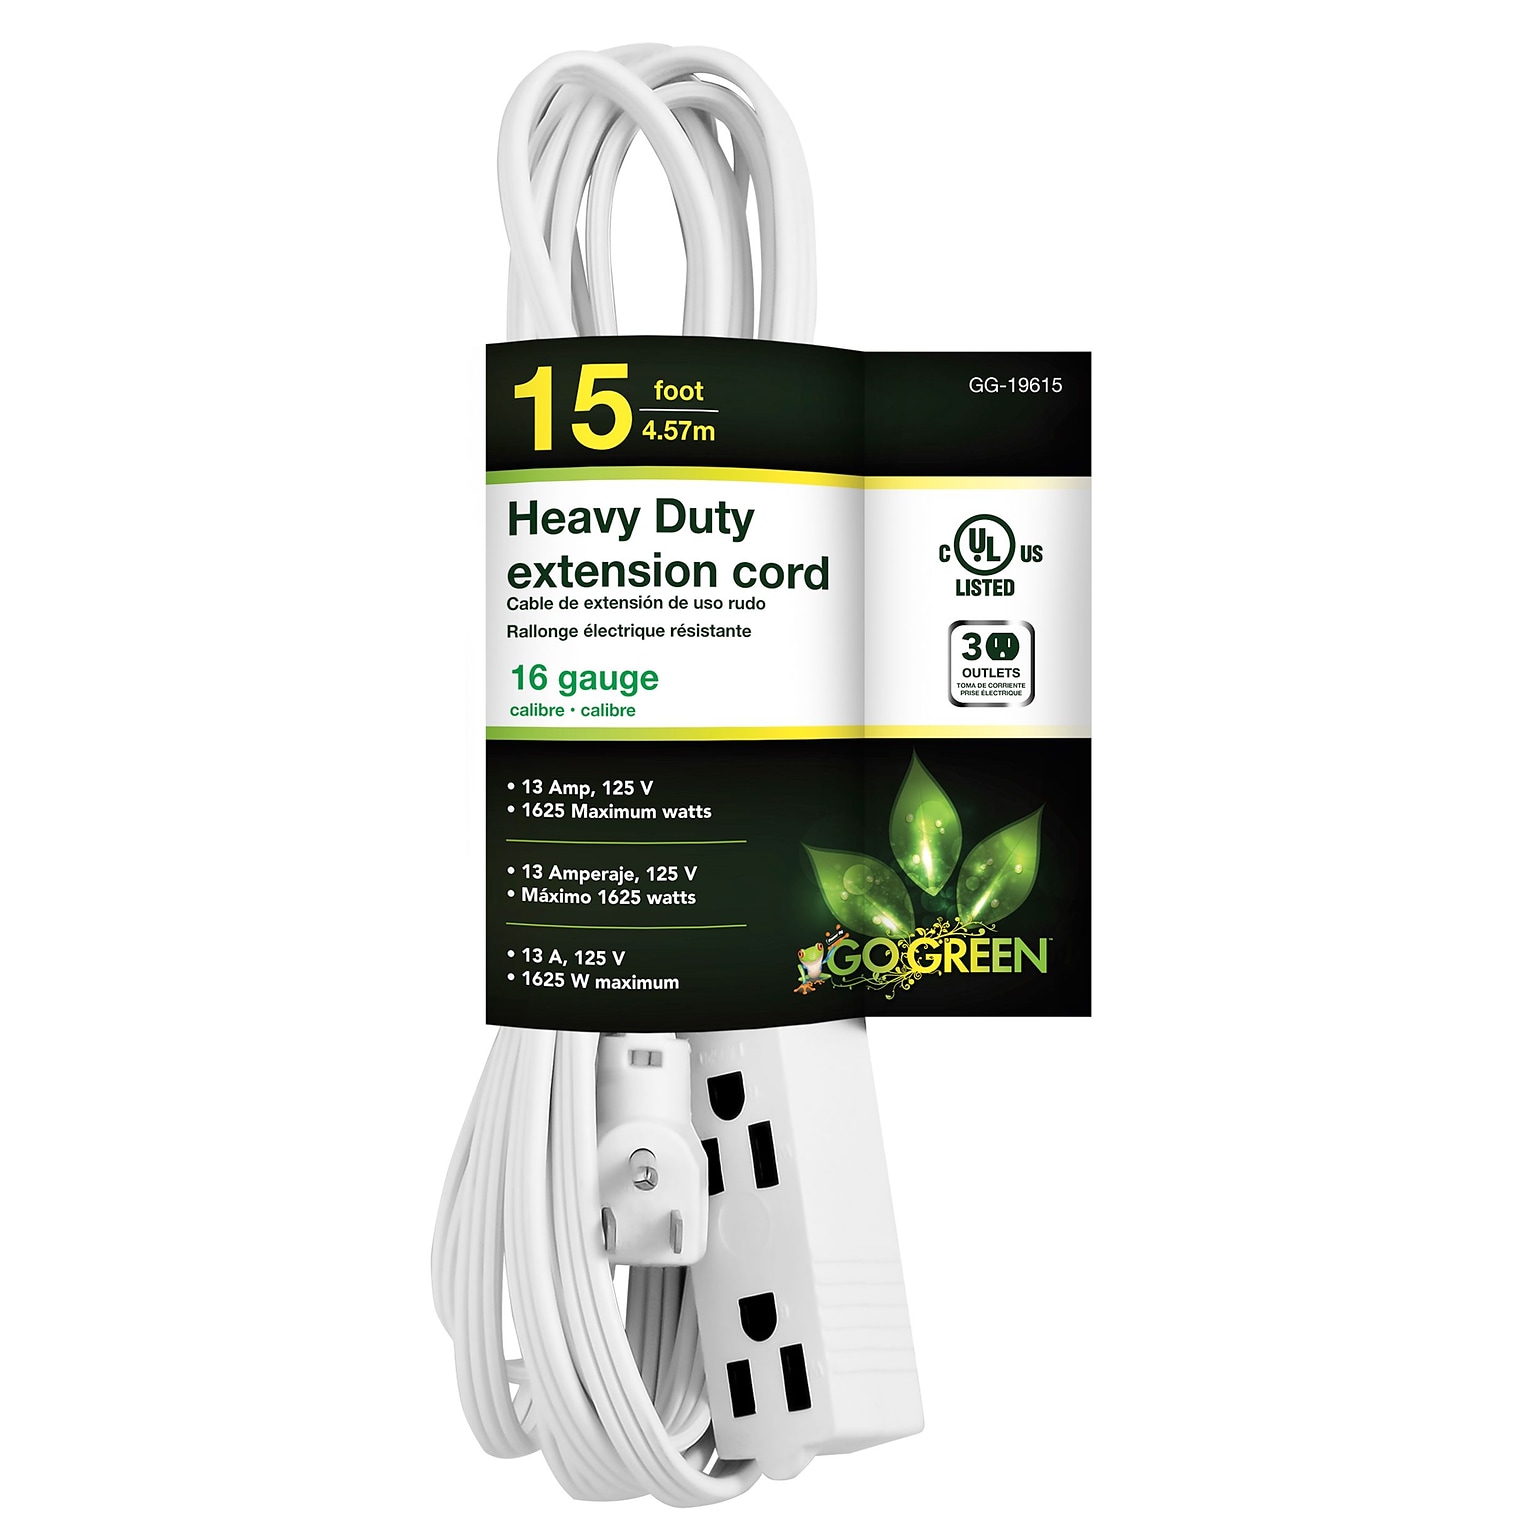 GoGreen Power 15 Extension Cord, 3-Outlet, 16 AWG, White (GG-19615)